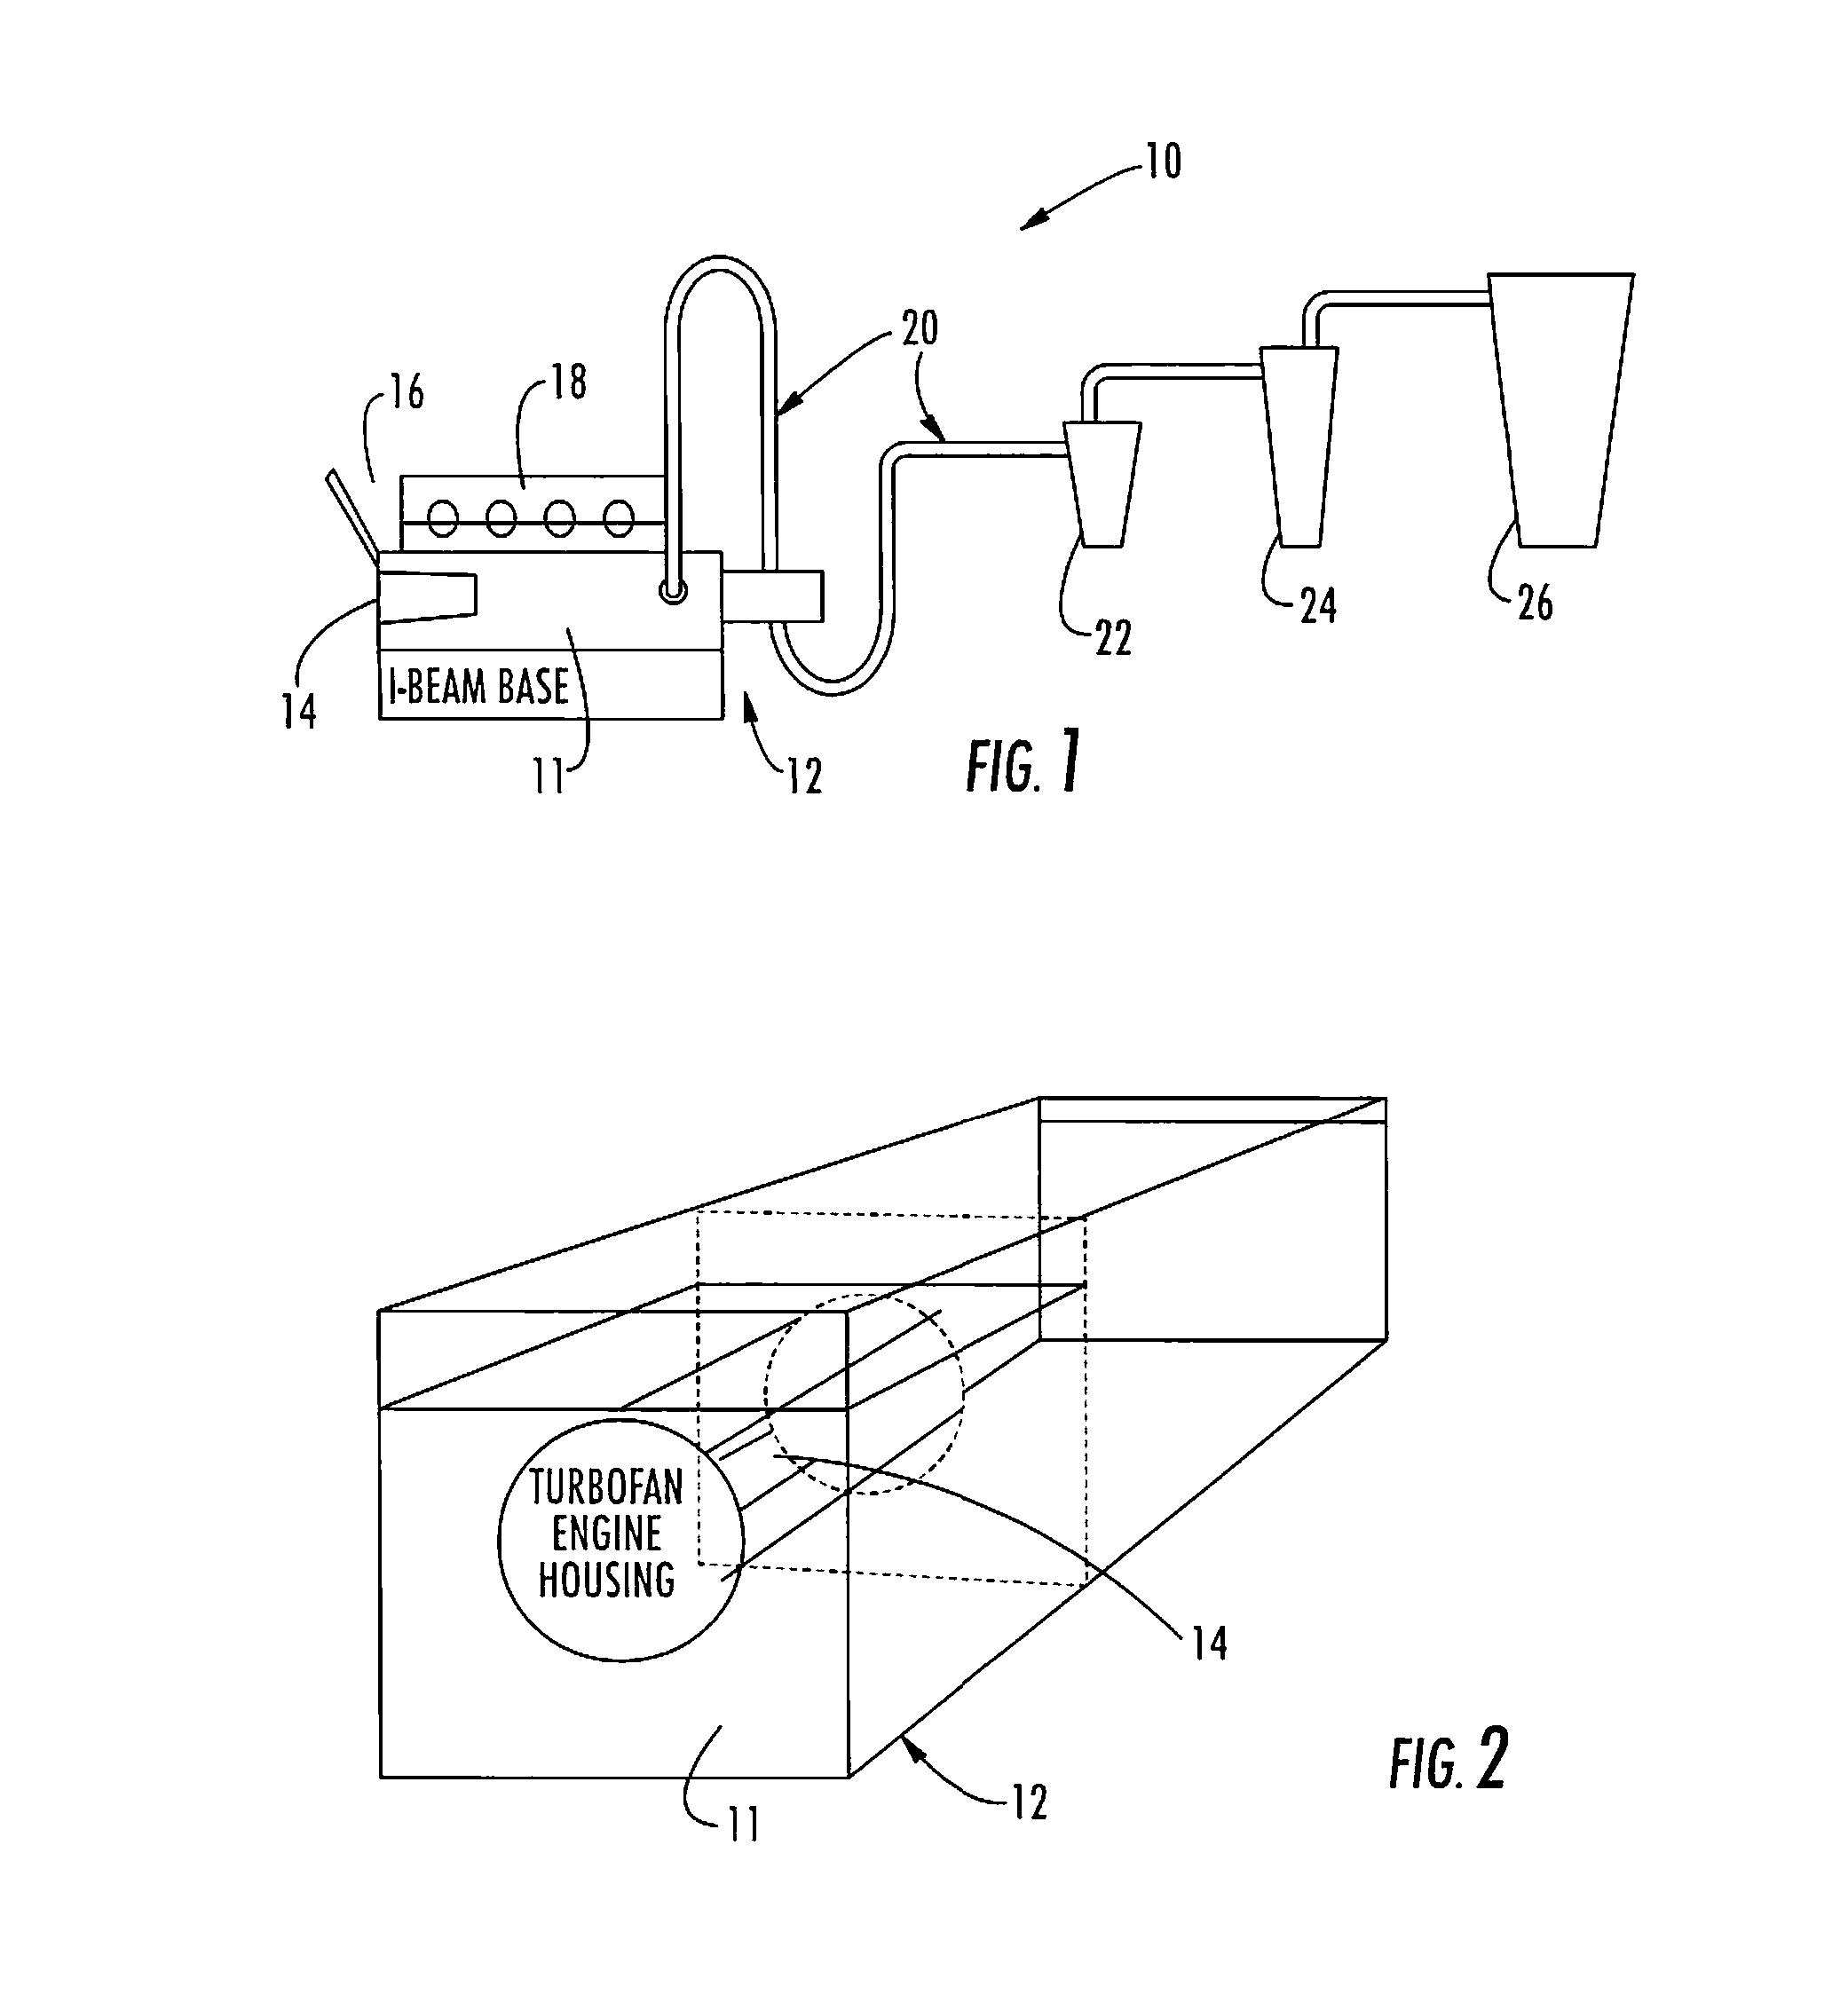 System and method employing turbofan jet engine for drying bulk materials